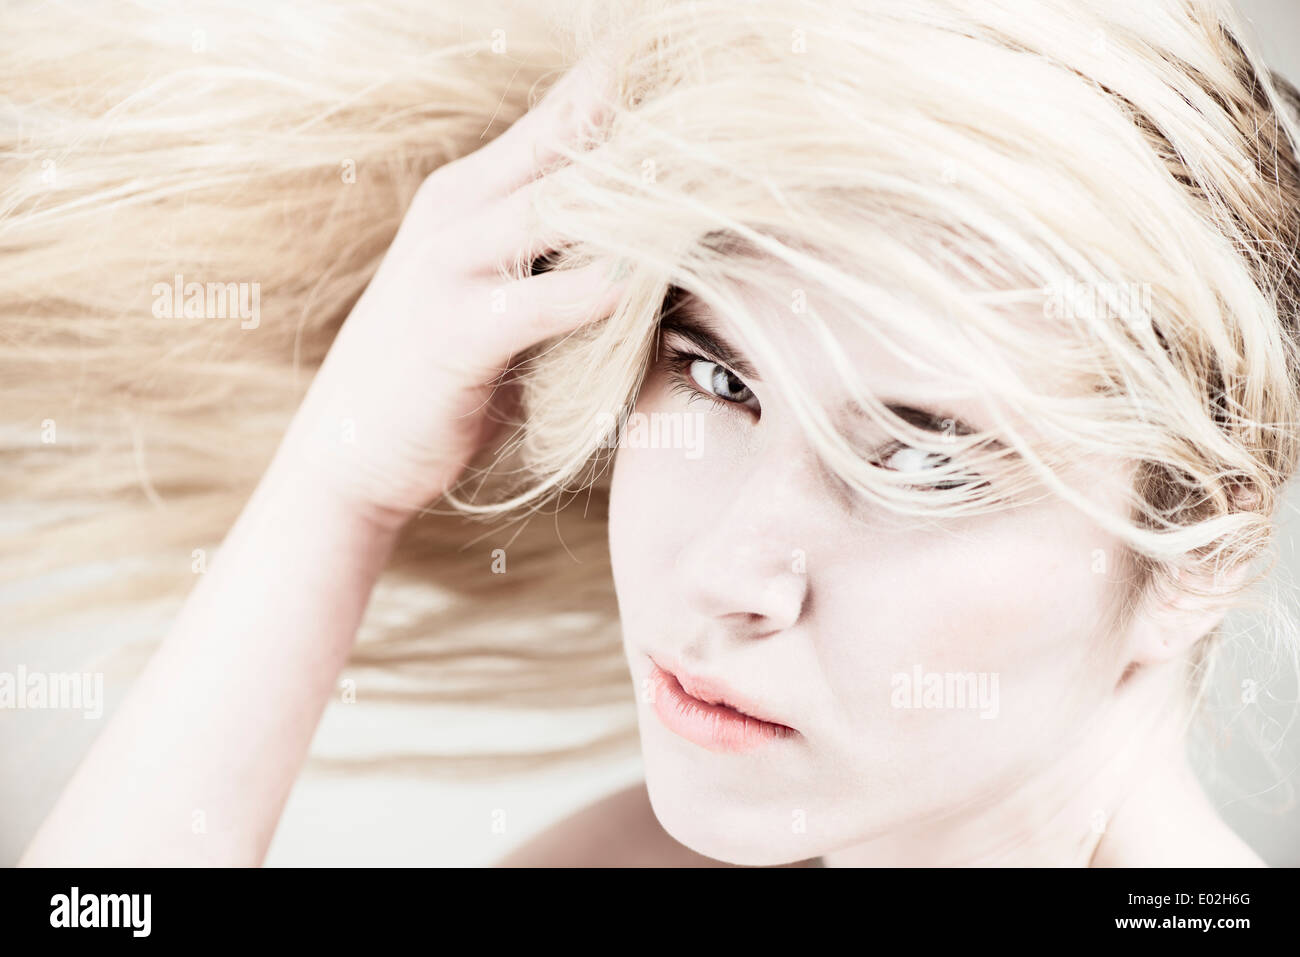 Young beautiful blonde woman with long hair. Showing expression of cool attitude and personality. Stock Photo